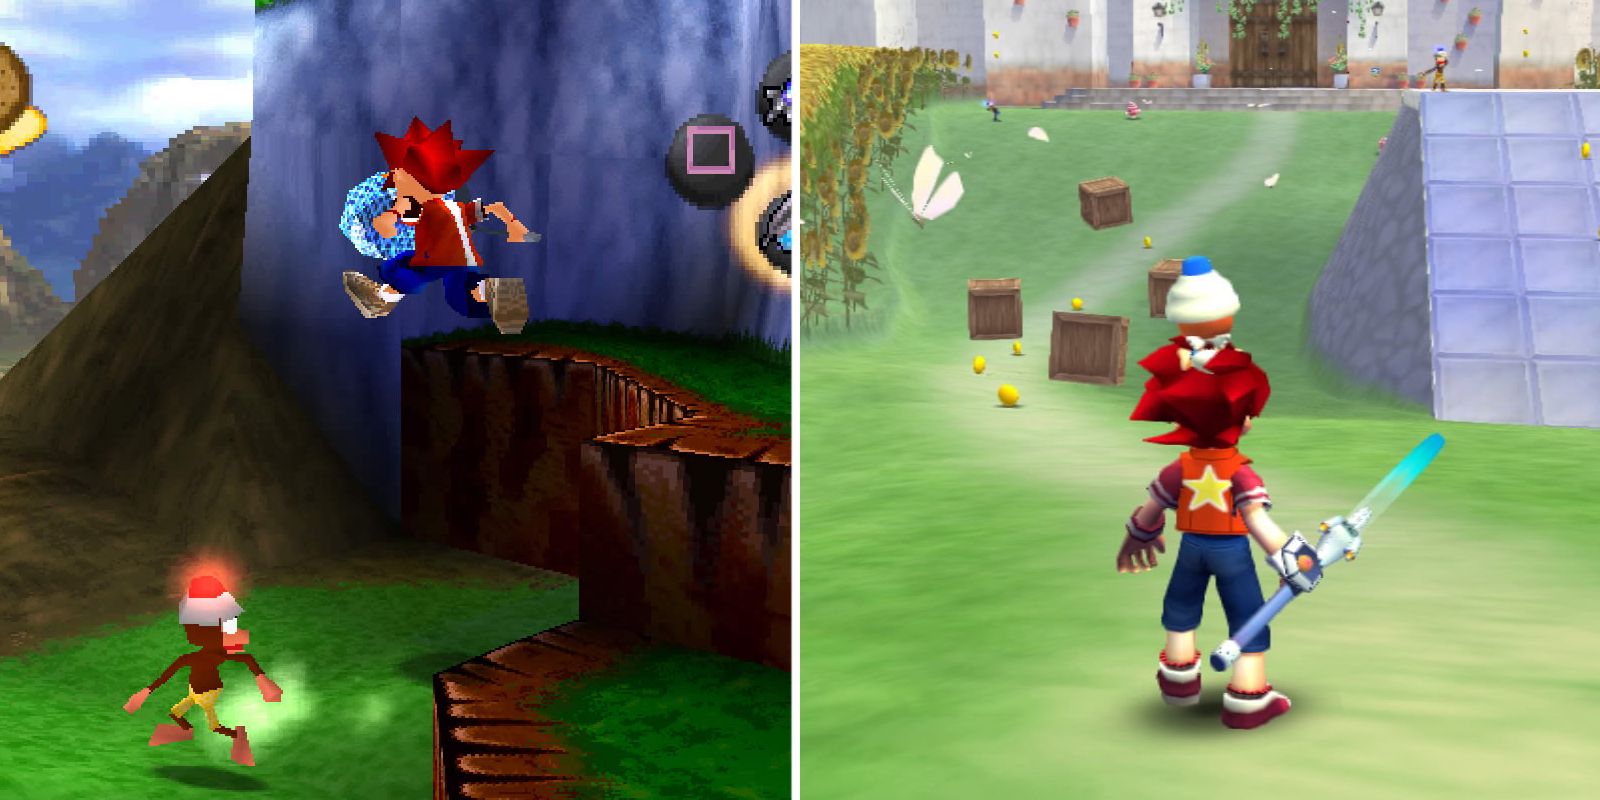 Spike trying to catch monkeys in Ape Escape and Ape Escape 2